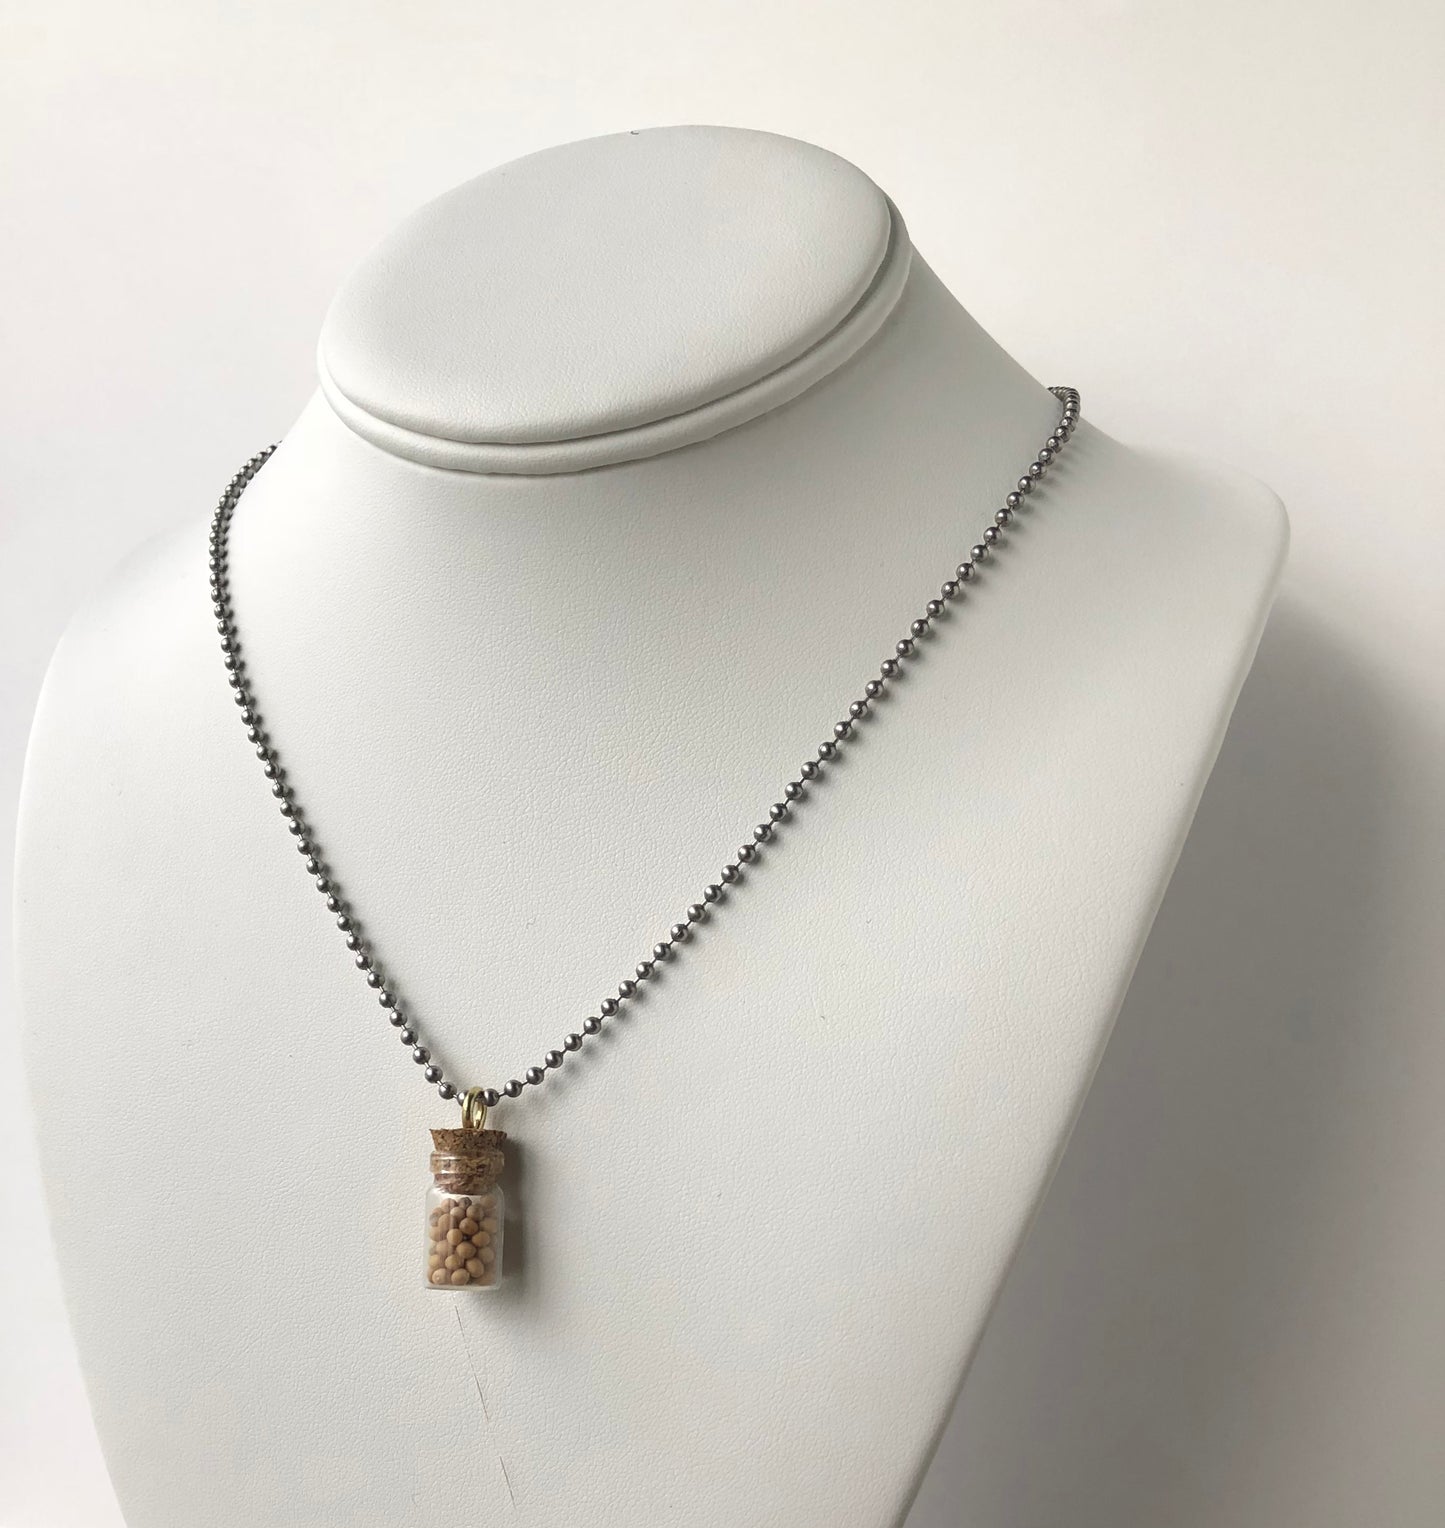 Mustard Seed Necklace - One seed